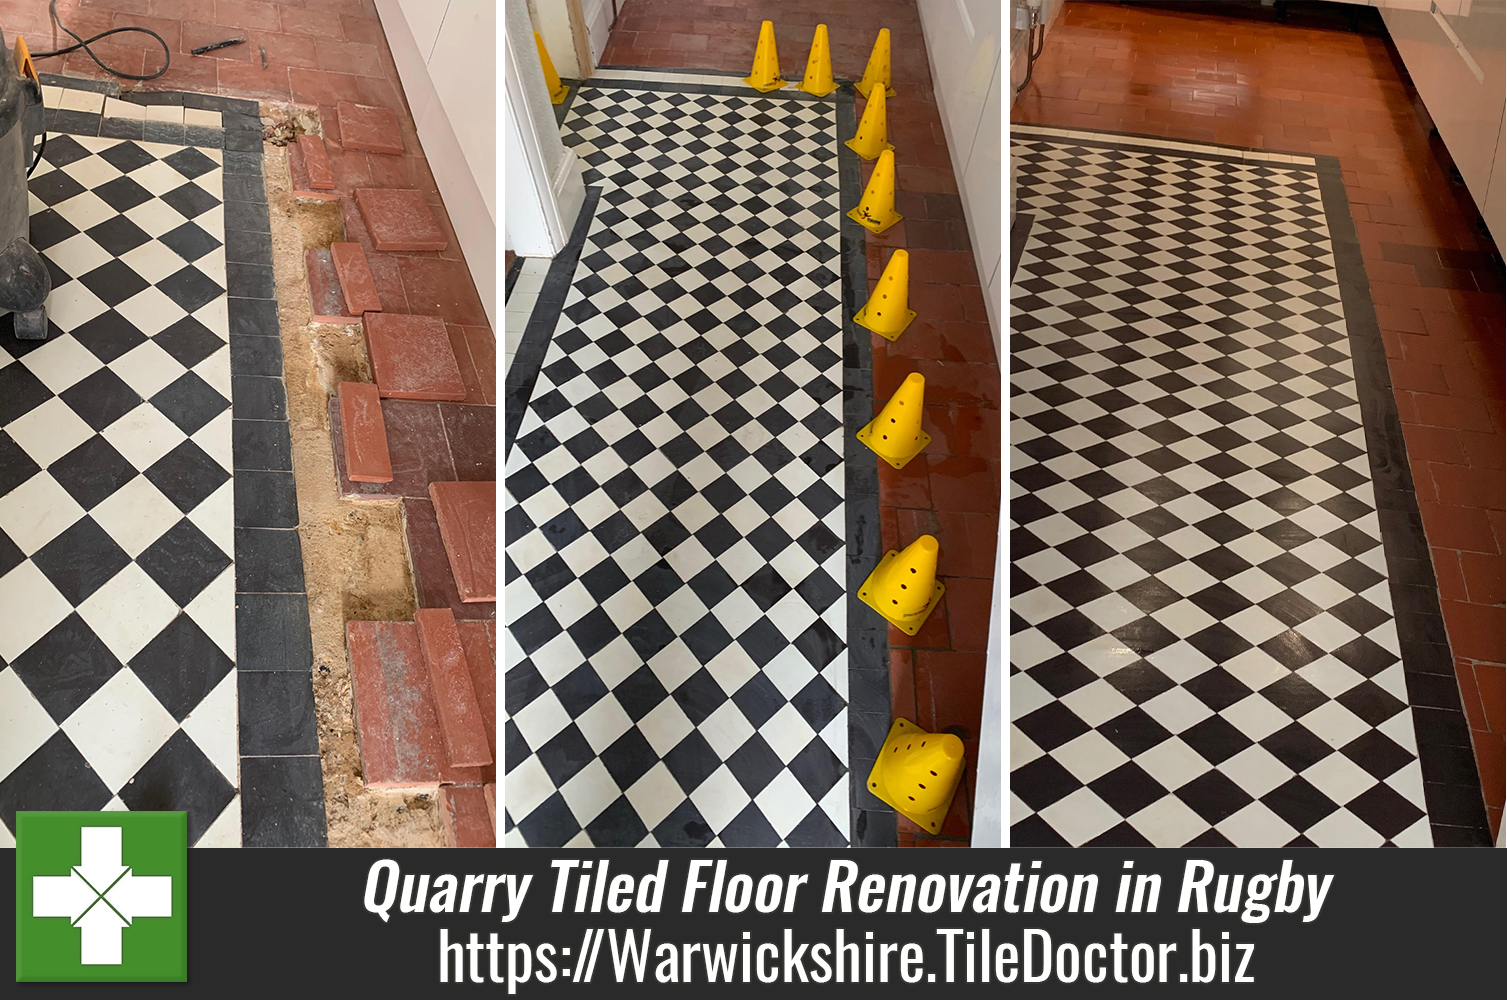 Quarry Tiled Floor Layout Altered and Renovated in Rugby